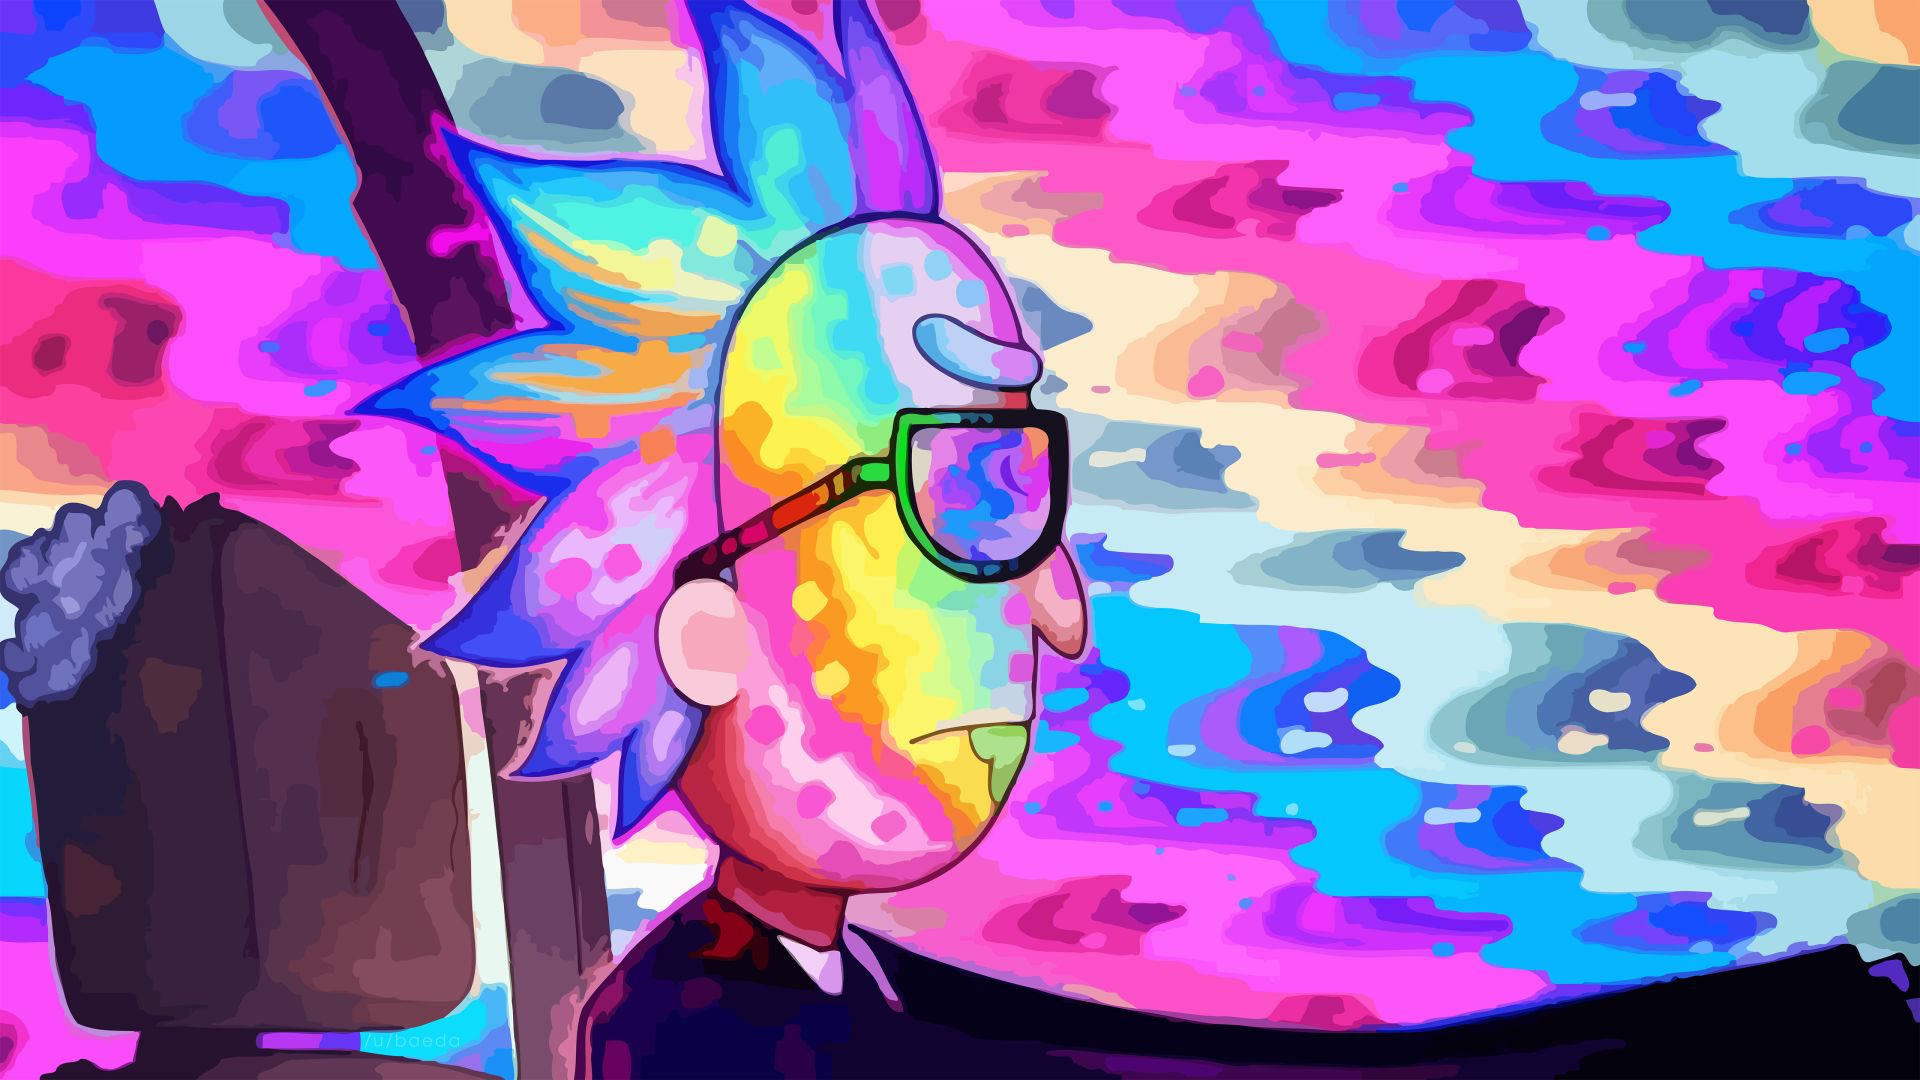 Rick and Morty Trippy cool hd wallpaper